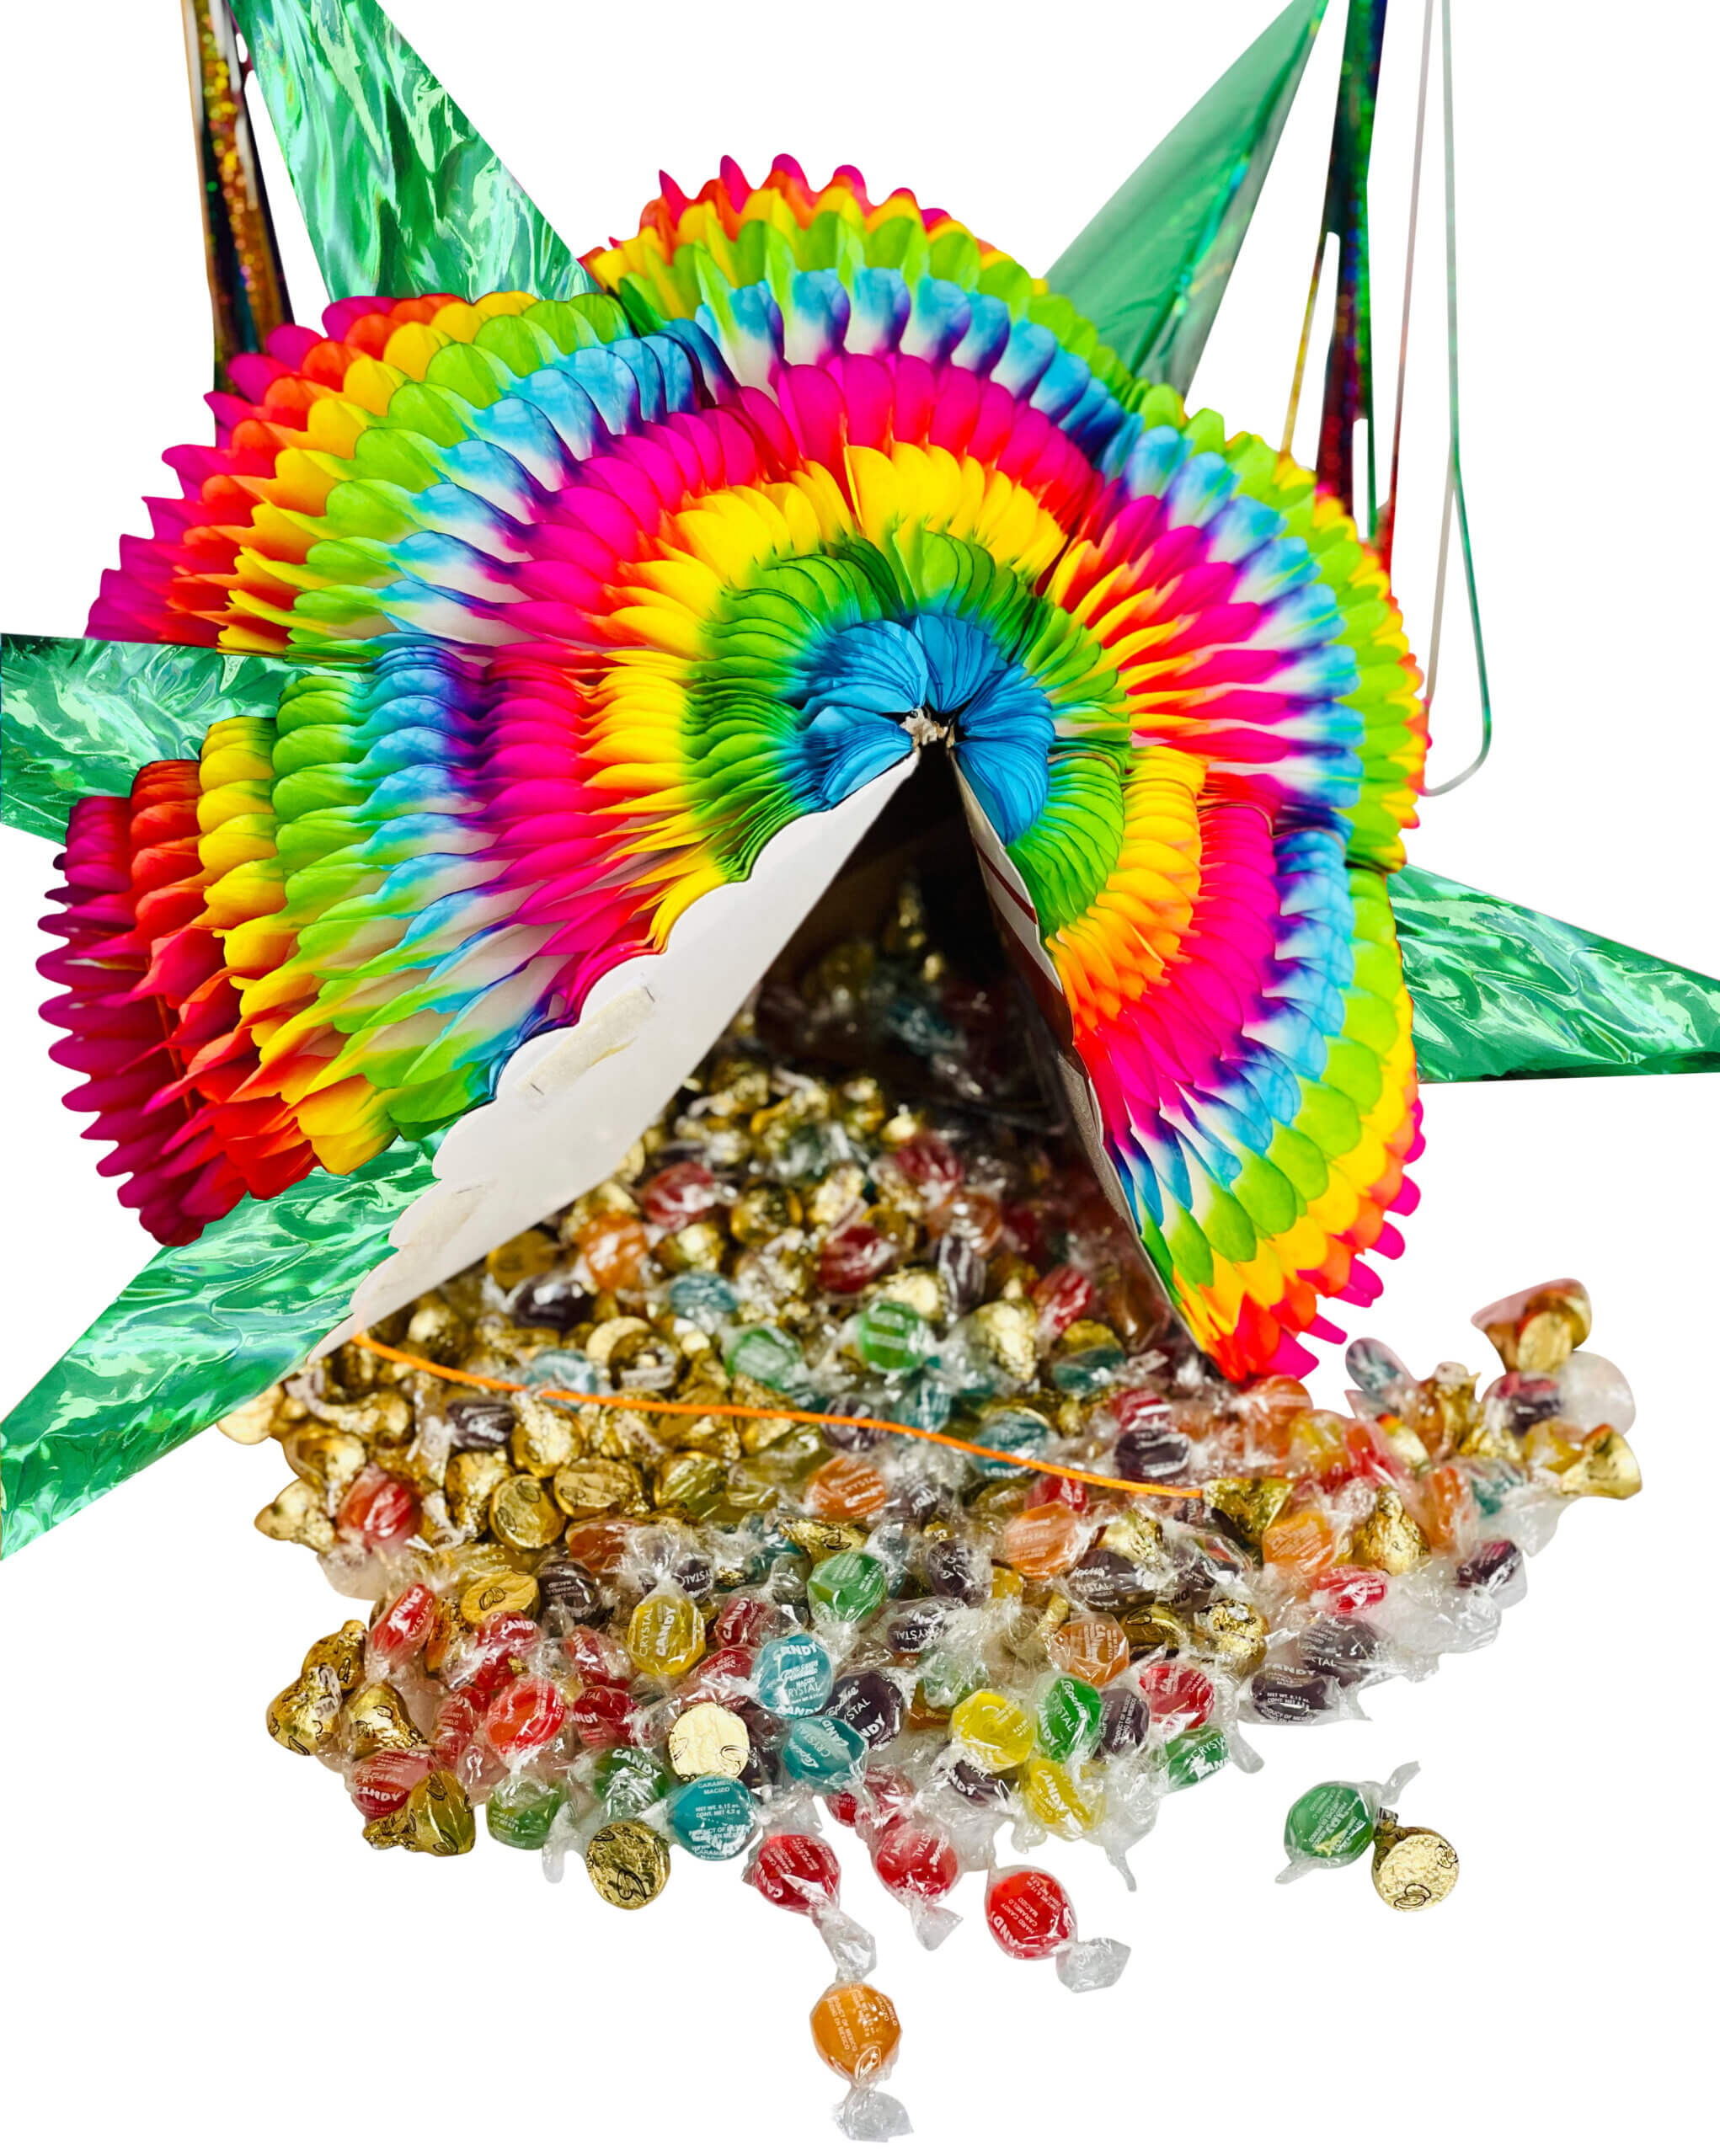 Extra Large Mexican Star Piñata with Green Cones and 30 Ft Rope Included,  Holds 3 Pounds of Pinata Filler - TexMex Fun Stuff